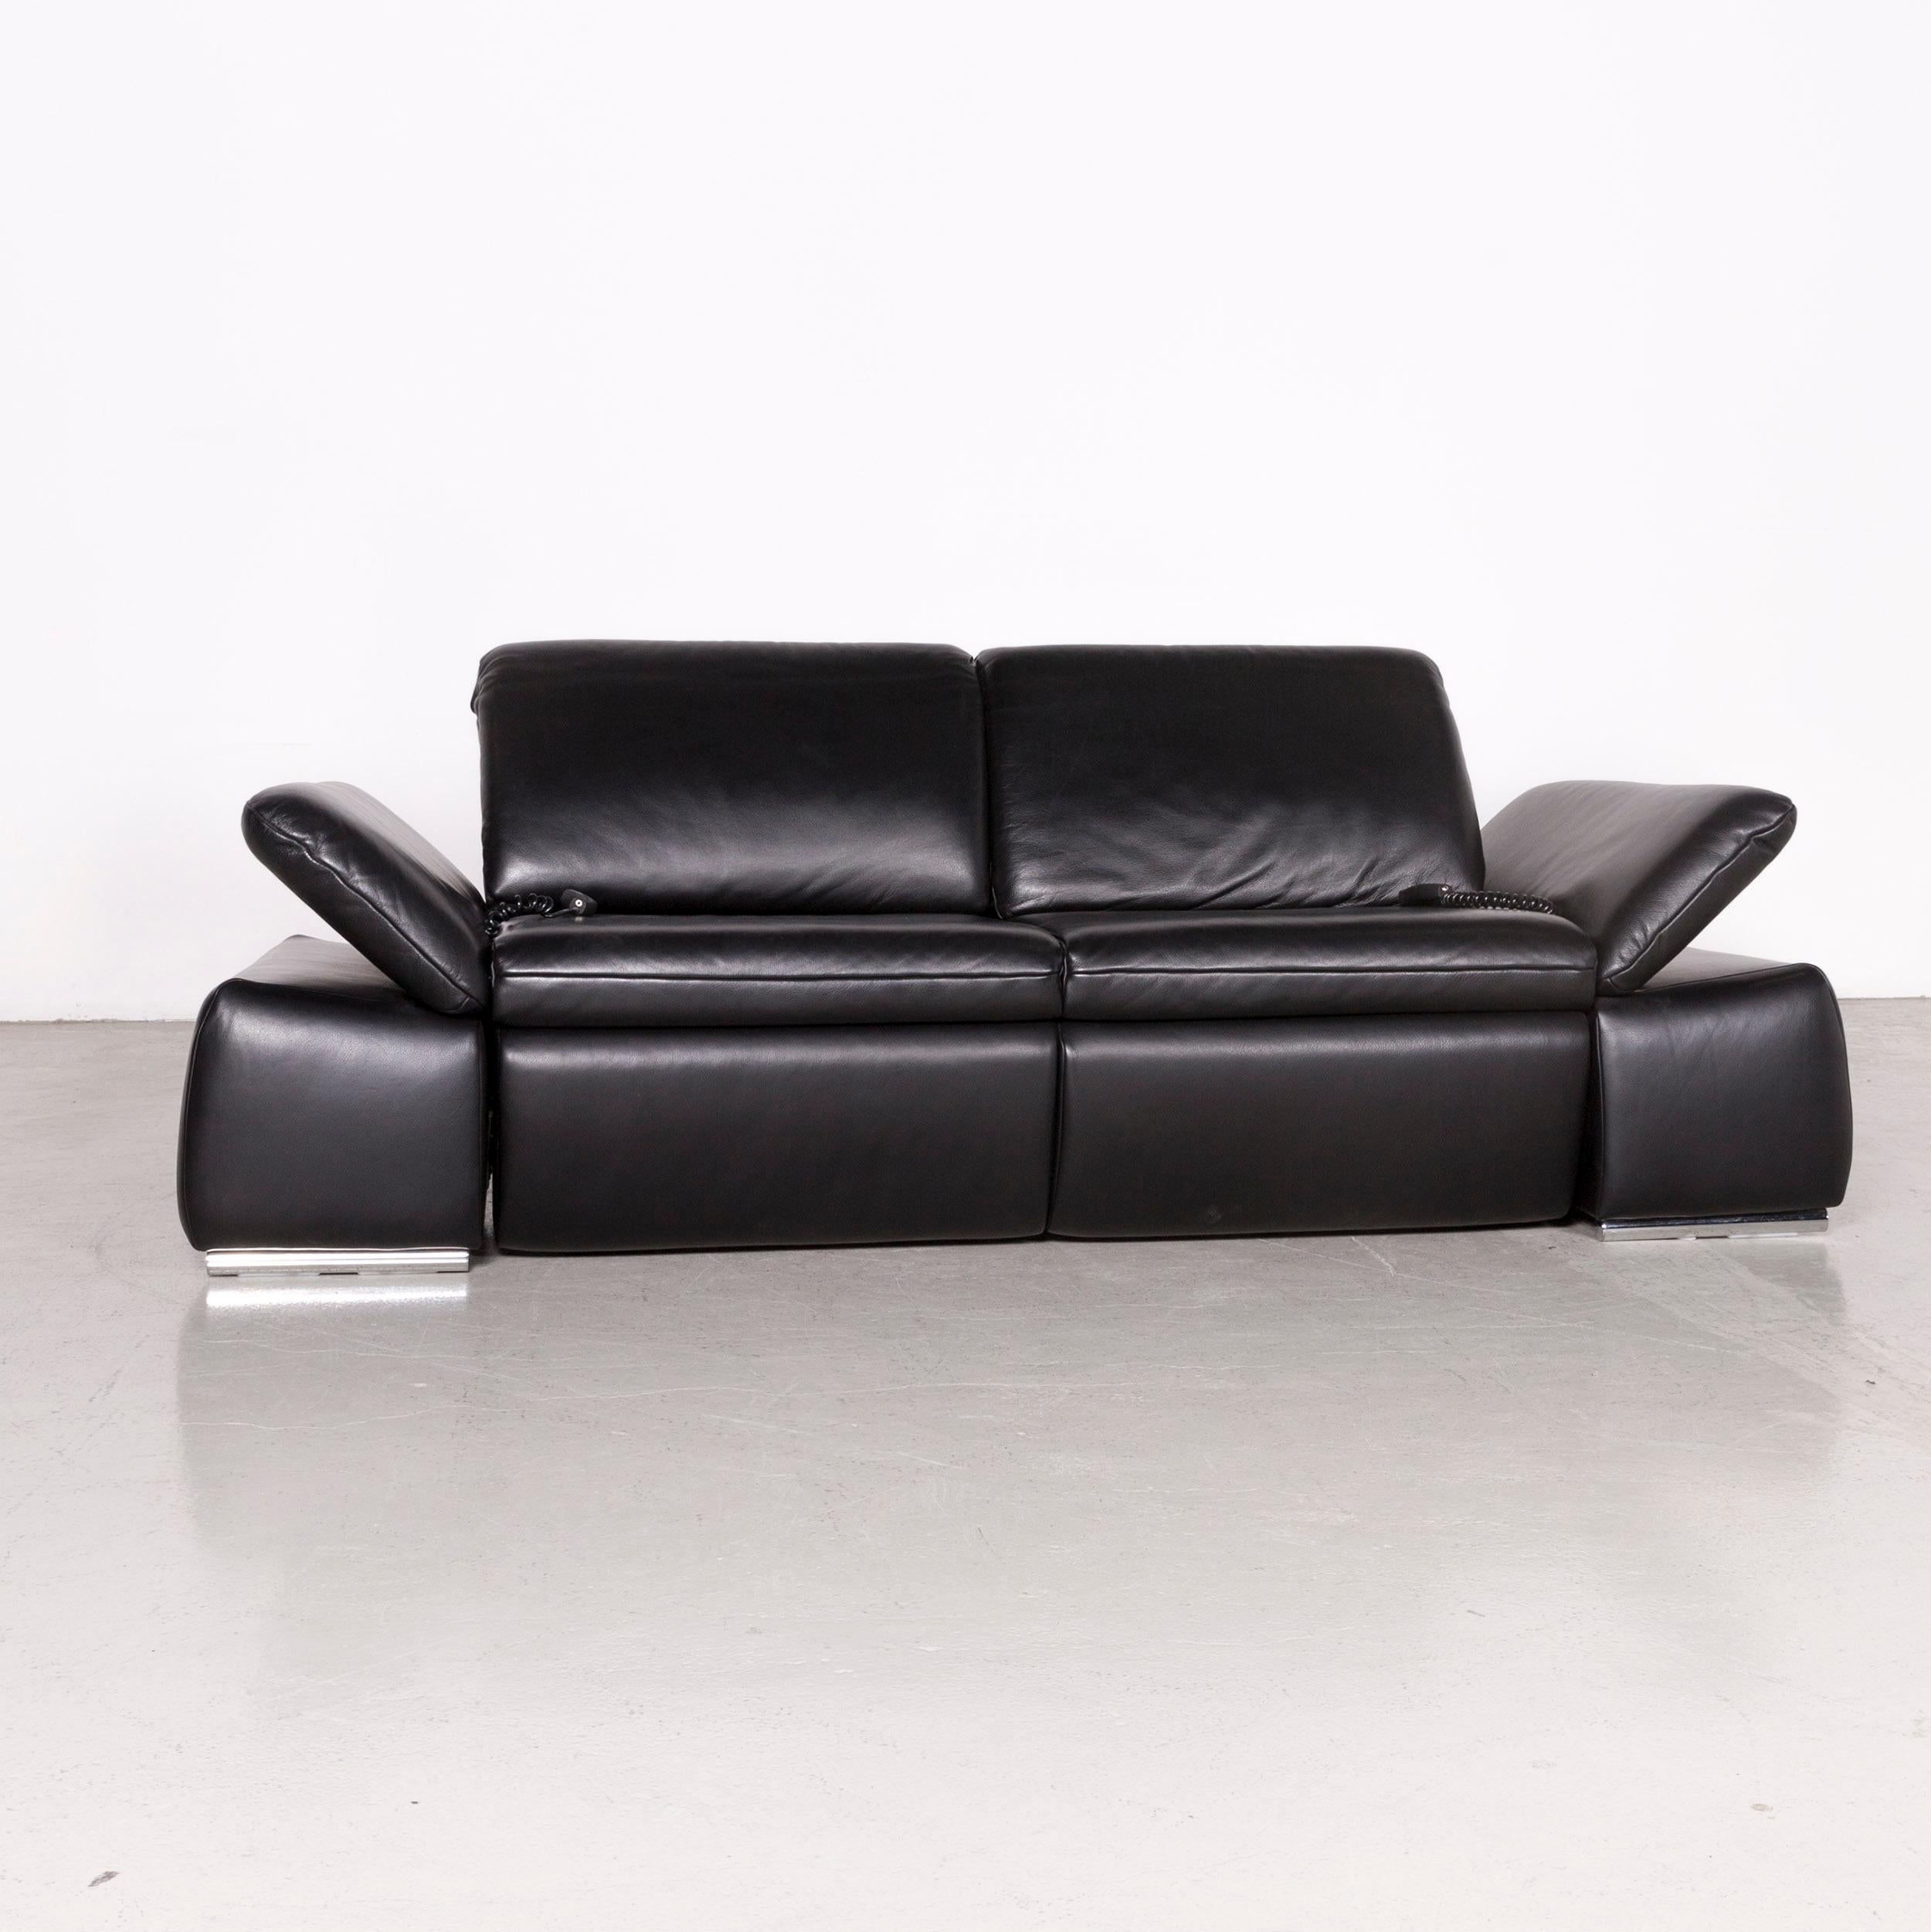 Koinor Evento Designer Sofa Black Three-Seat Leather Couch Electric Function In Good Condition For Sale In Cologne, DE